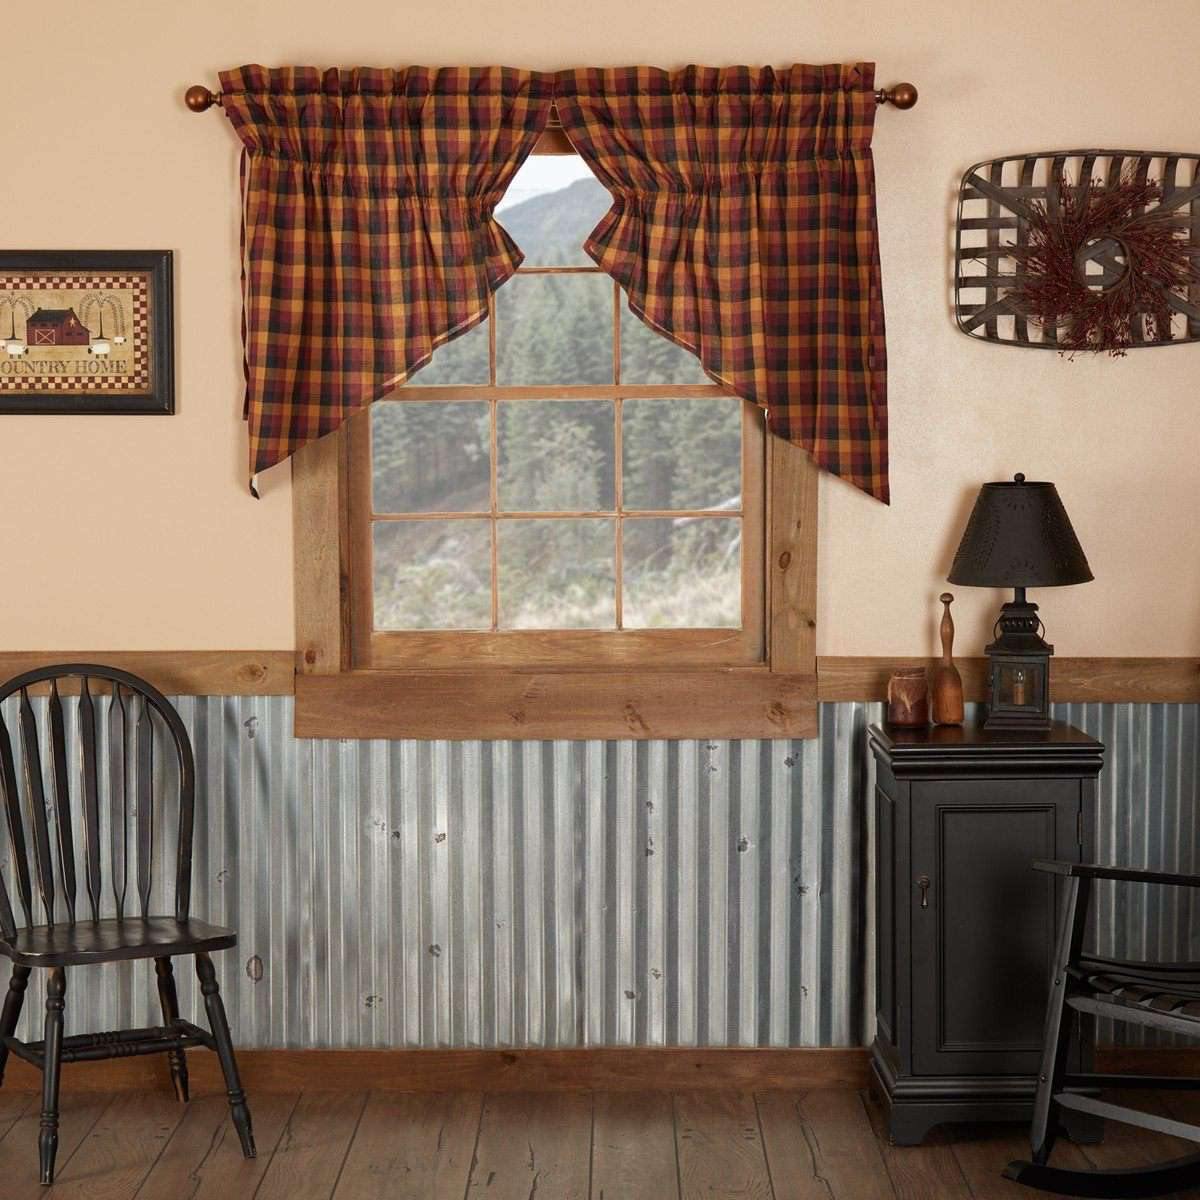 Heritage Farms Primitive Check Prairie Swag Curtain Set of 2 36x36x18 VHC Brands